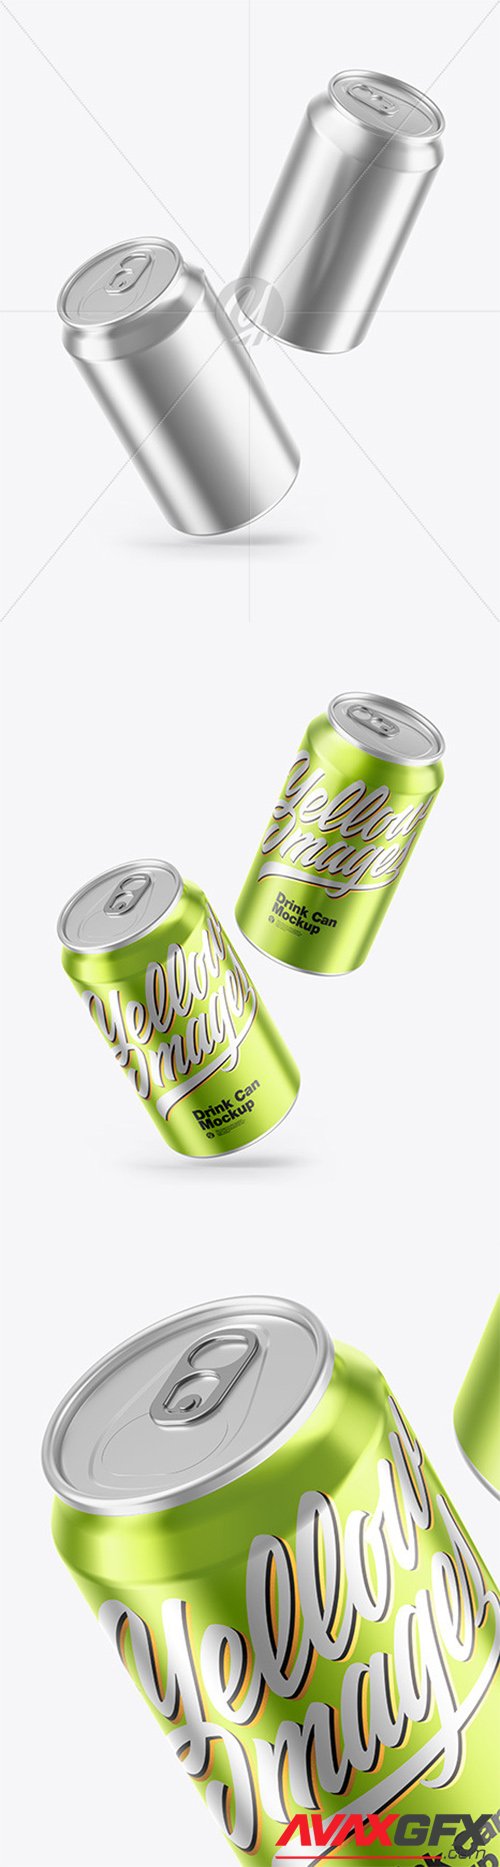 Glossy Metallic Drink Cans Mockup 66564